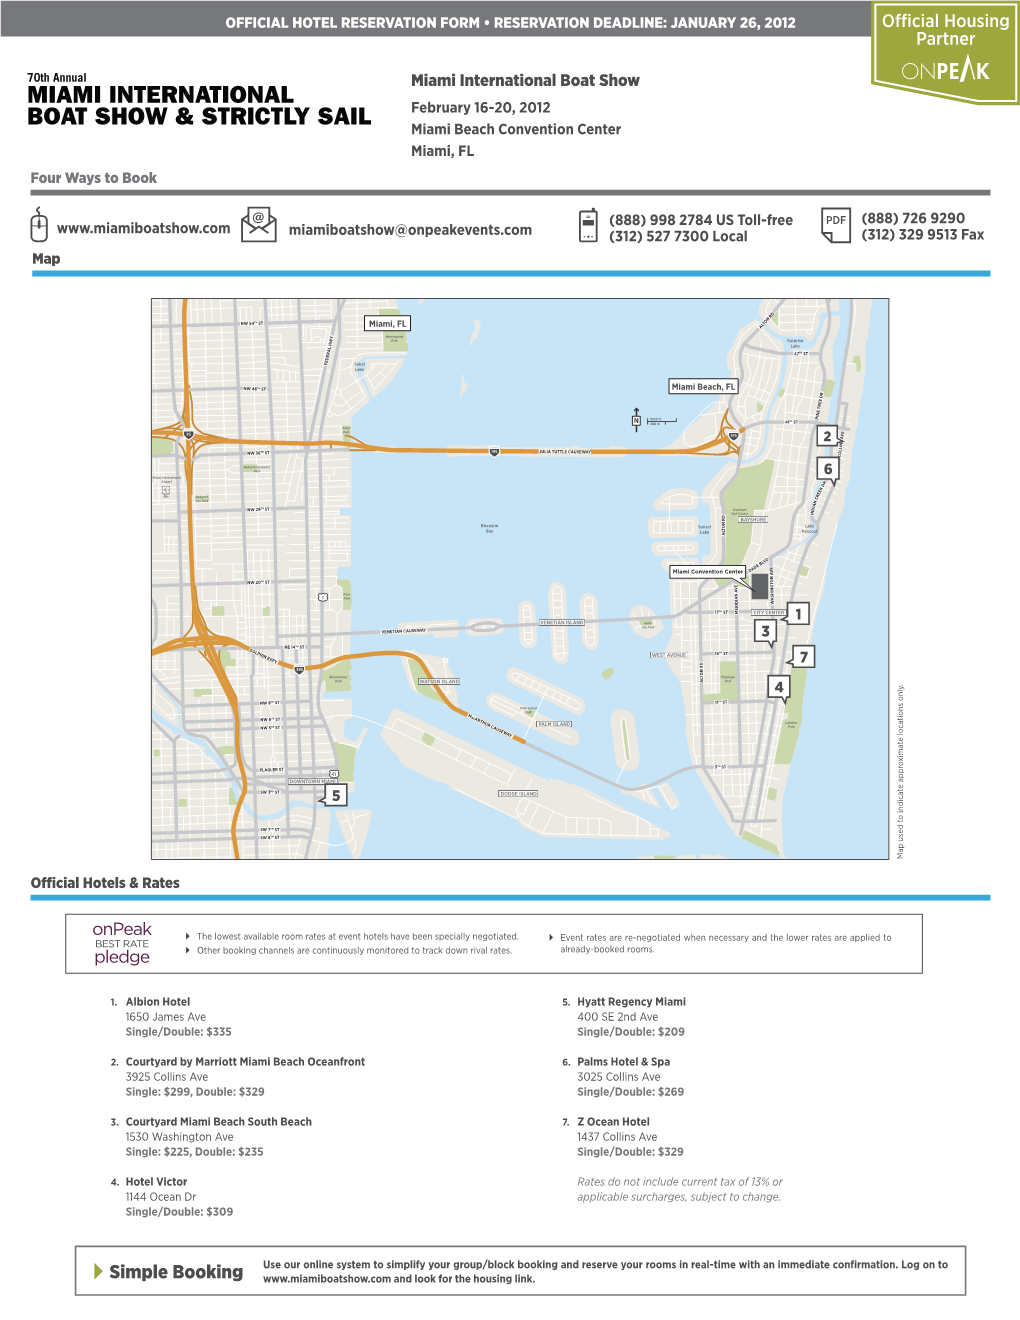 Official Hotel Reservation Form for Miami International Boat Show 2012